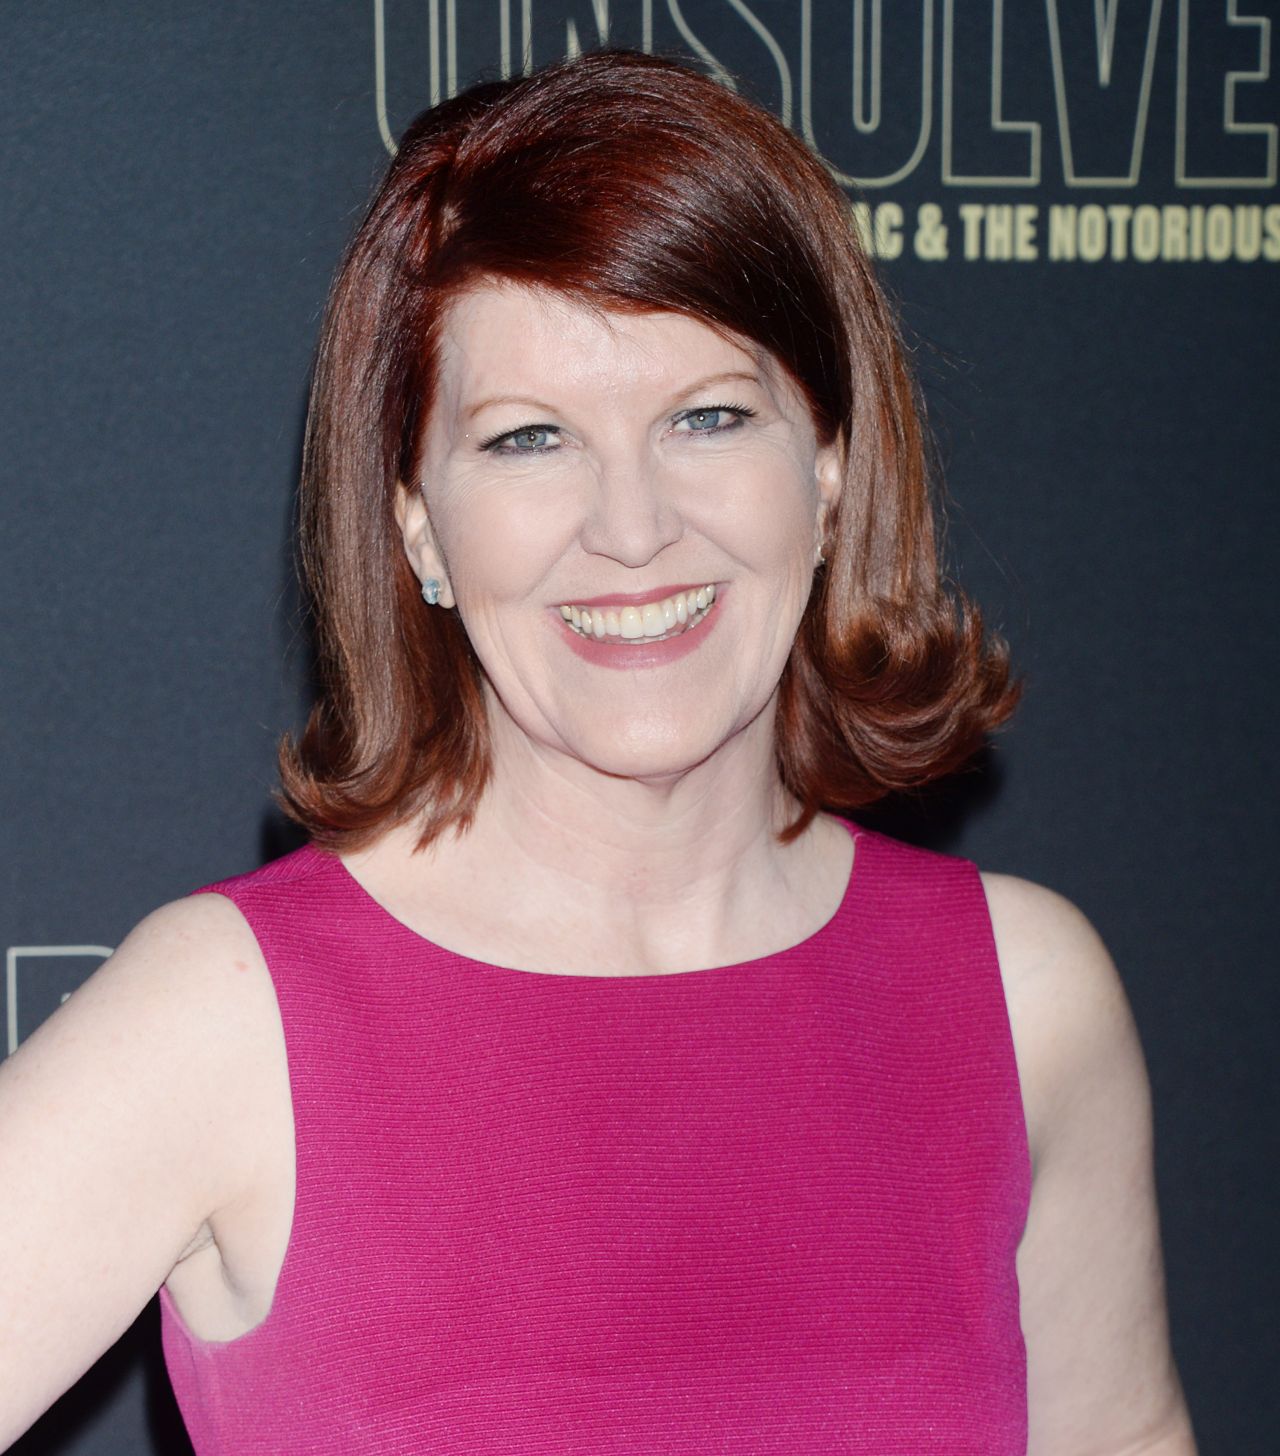 Kate Flannery “Unsolved The Murders of Tupac and The Notorious B.I.G